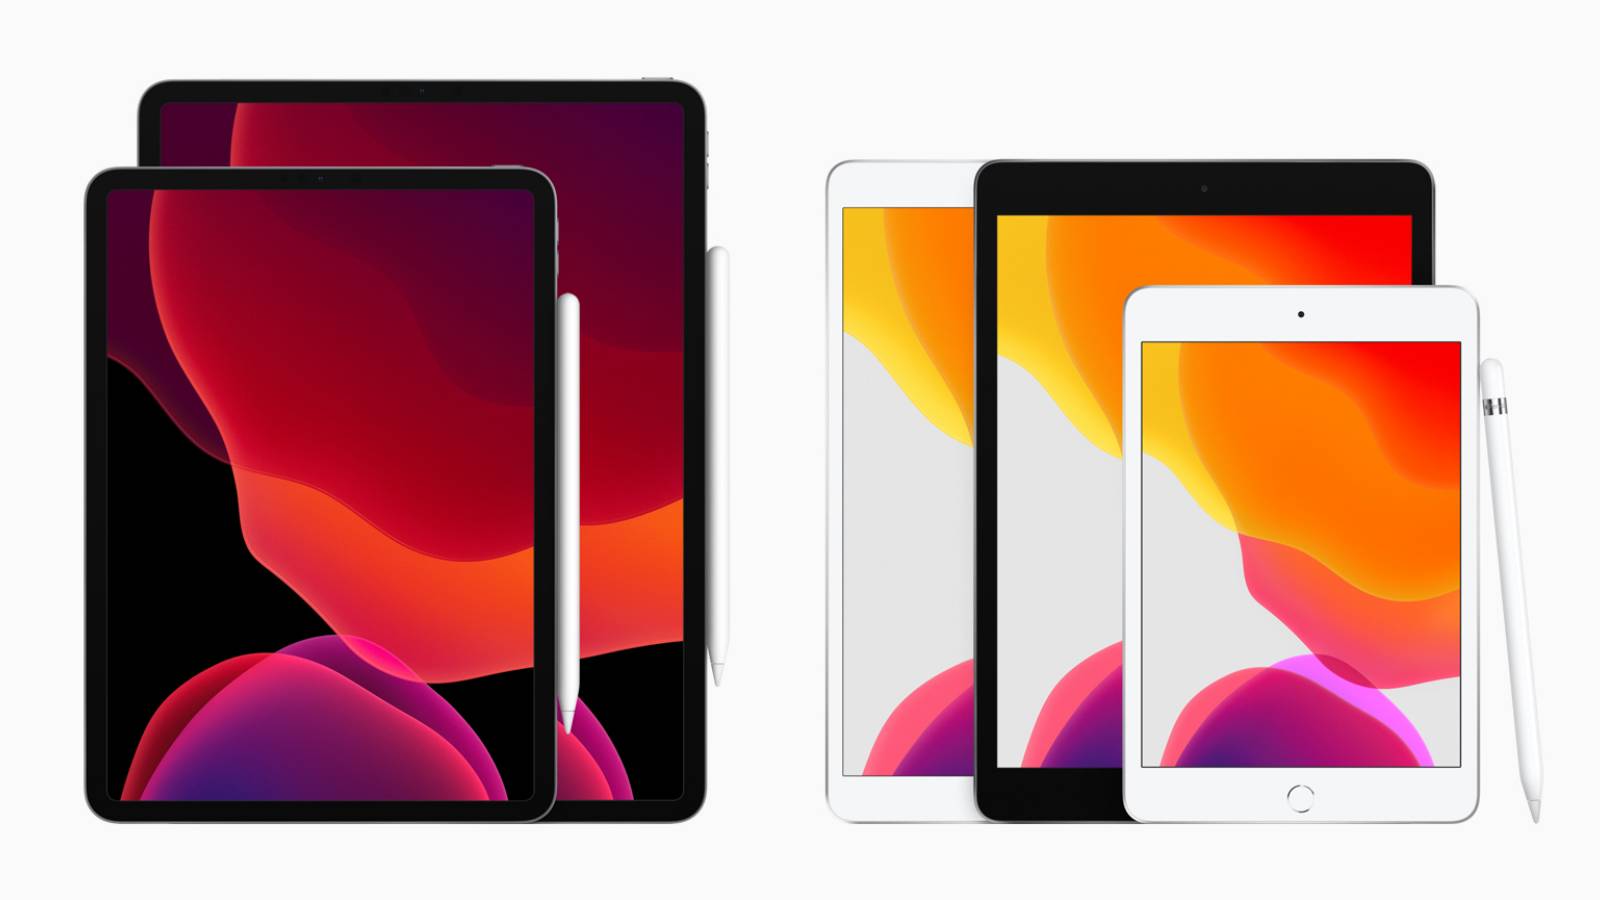 Apple is making a BIG Change for the iPad Pro in 2020